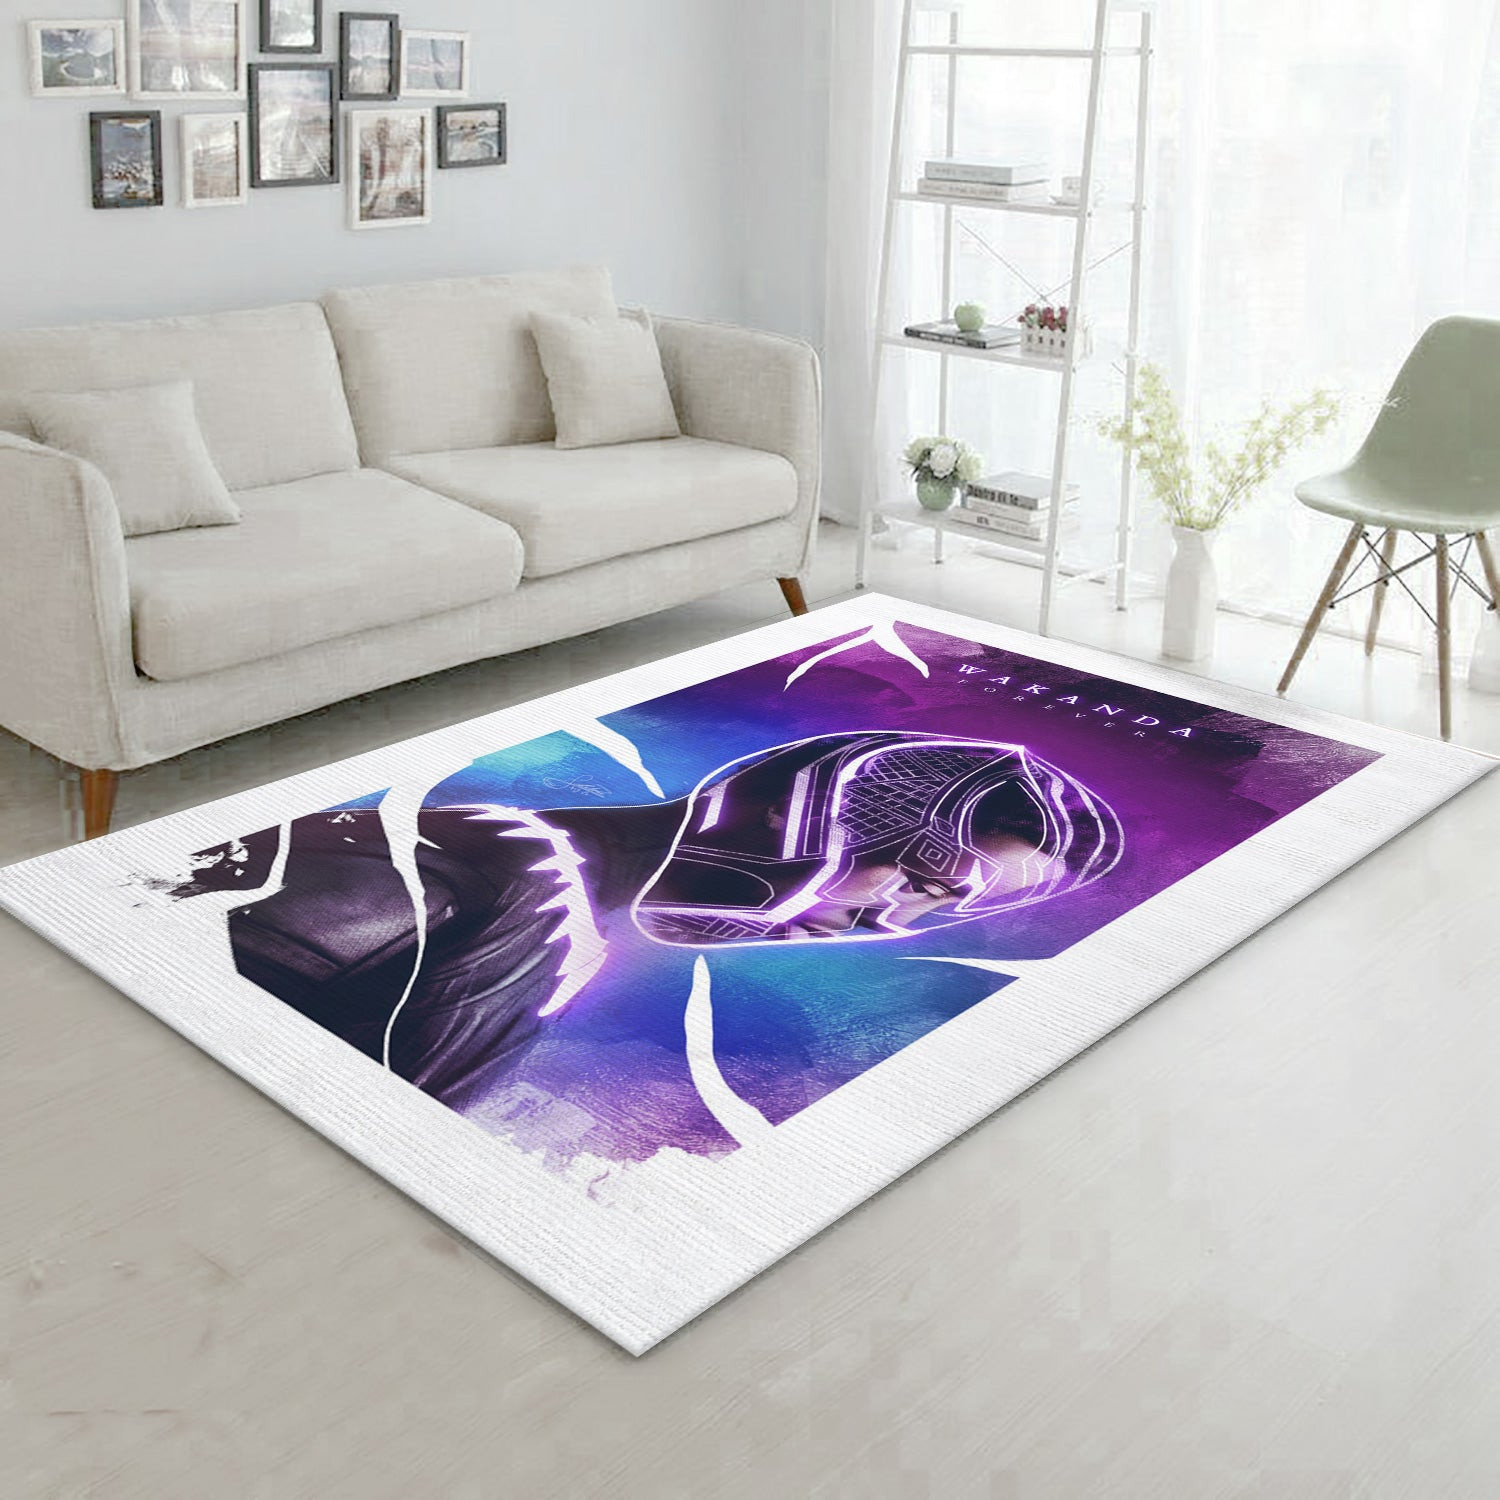 Black Panther Wakanda Forever Movie Area Rug, Living Room And Bedroom Rug - Floor Decor - Indoor Outdoor Rugs